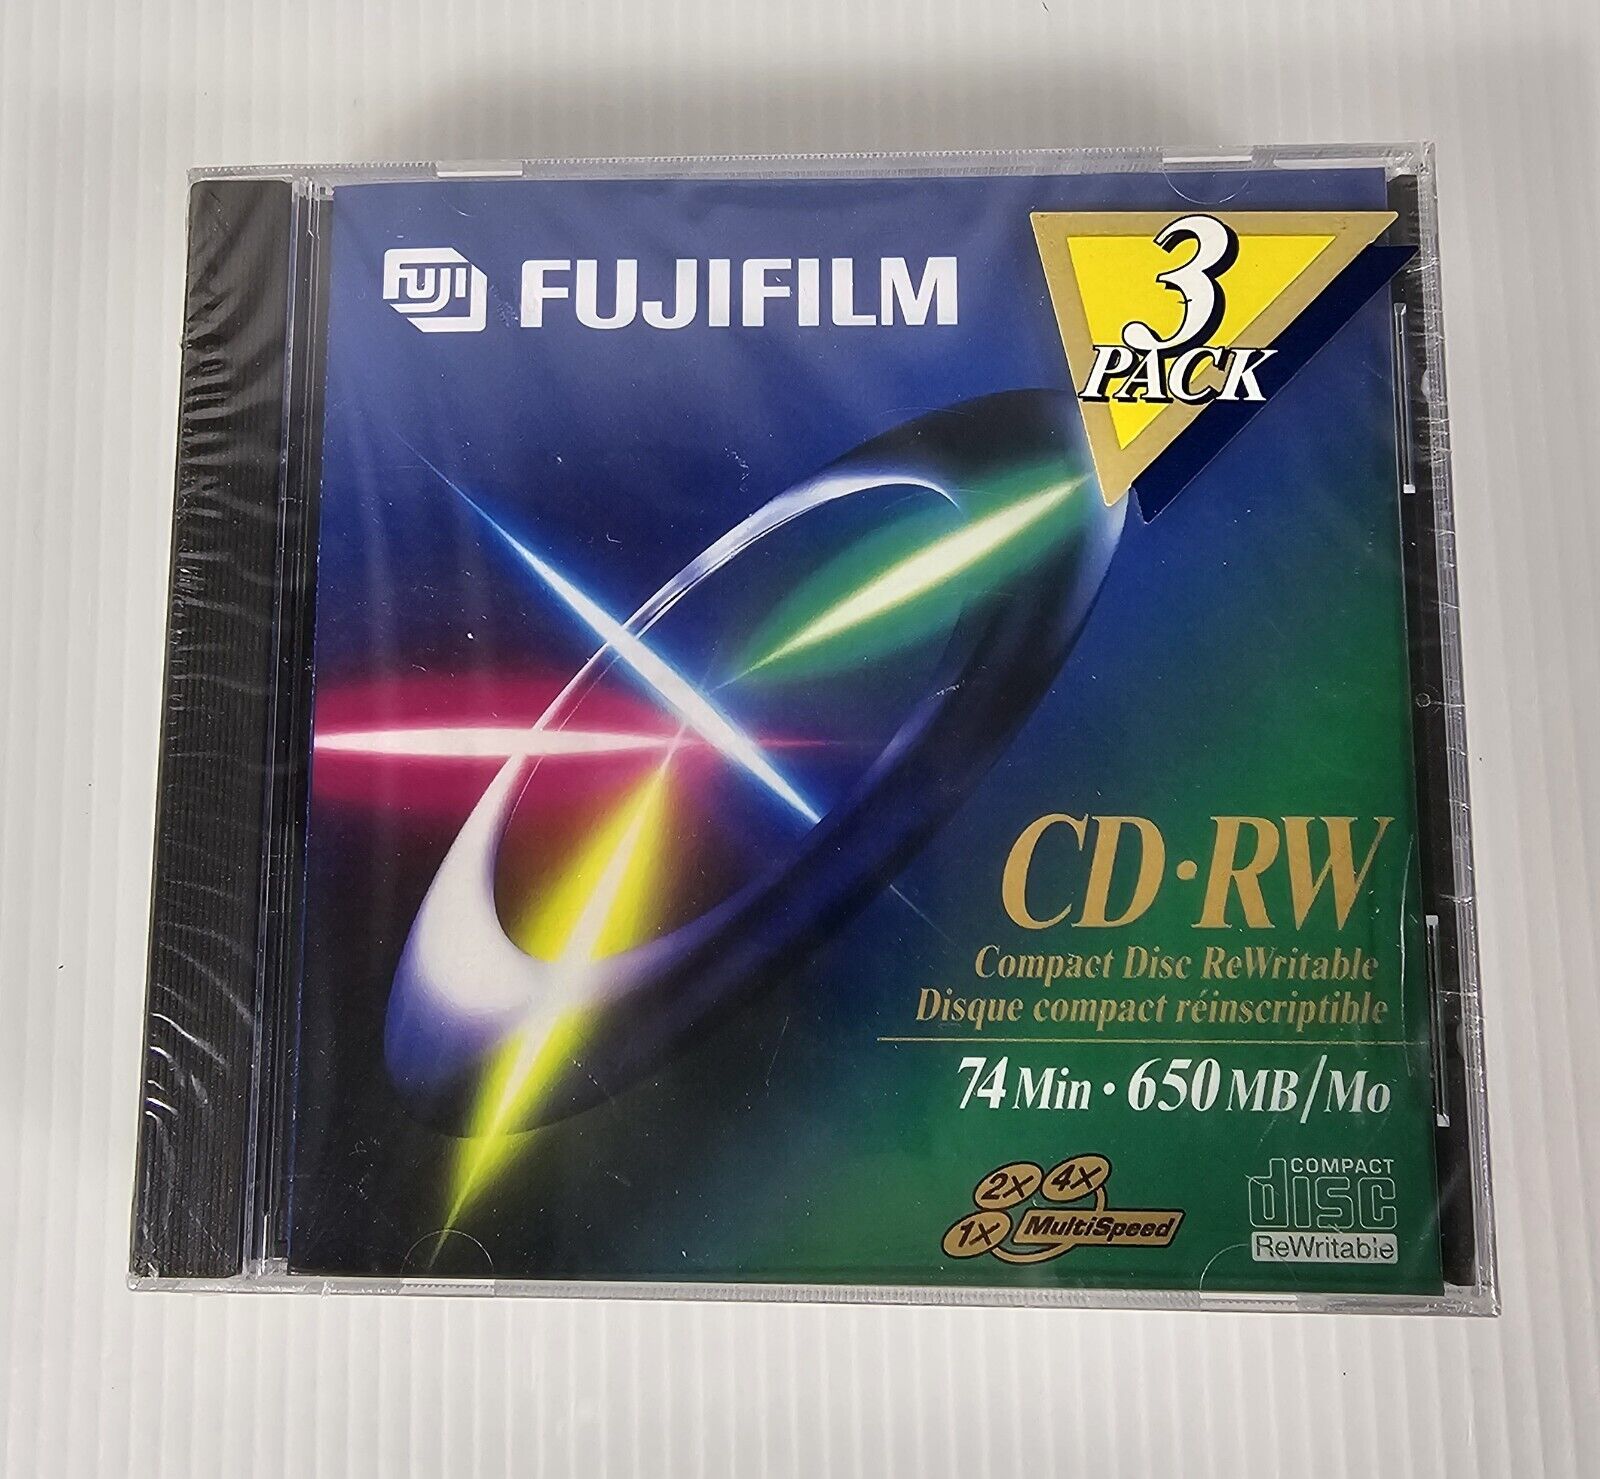 FujiFilm 3-Pack of 74-Minute Rewritable CD-RW Compact Discs New Sealed